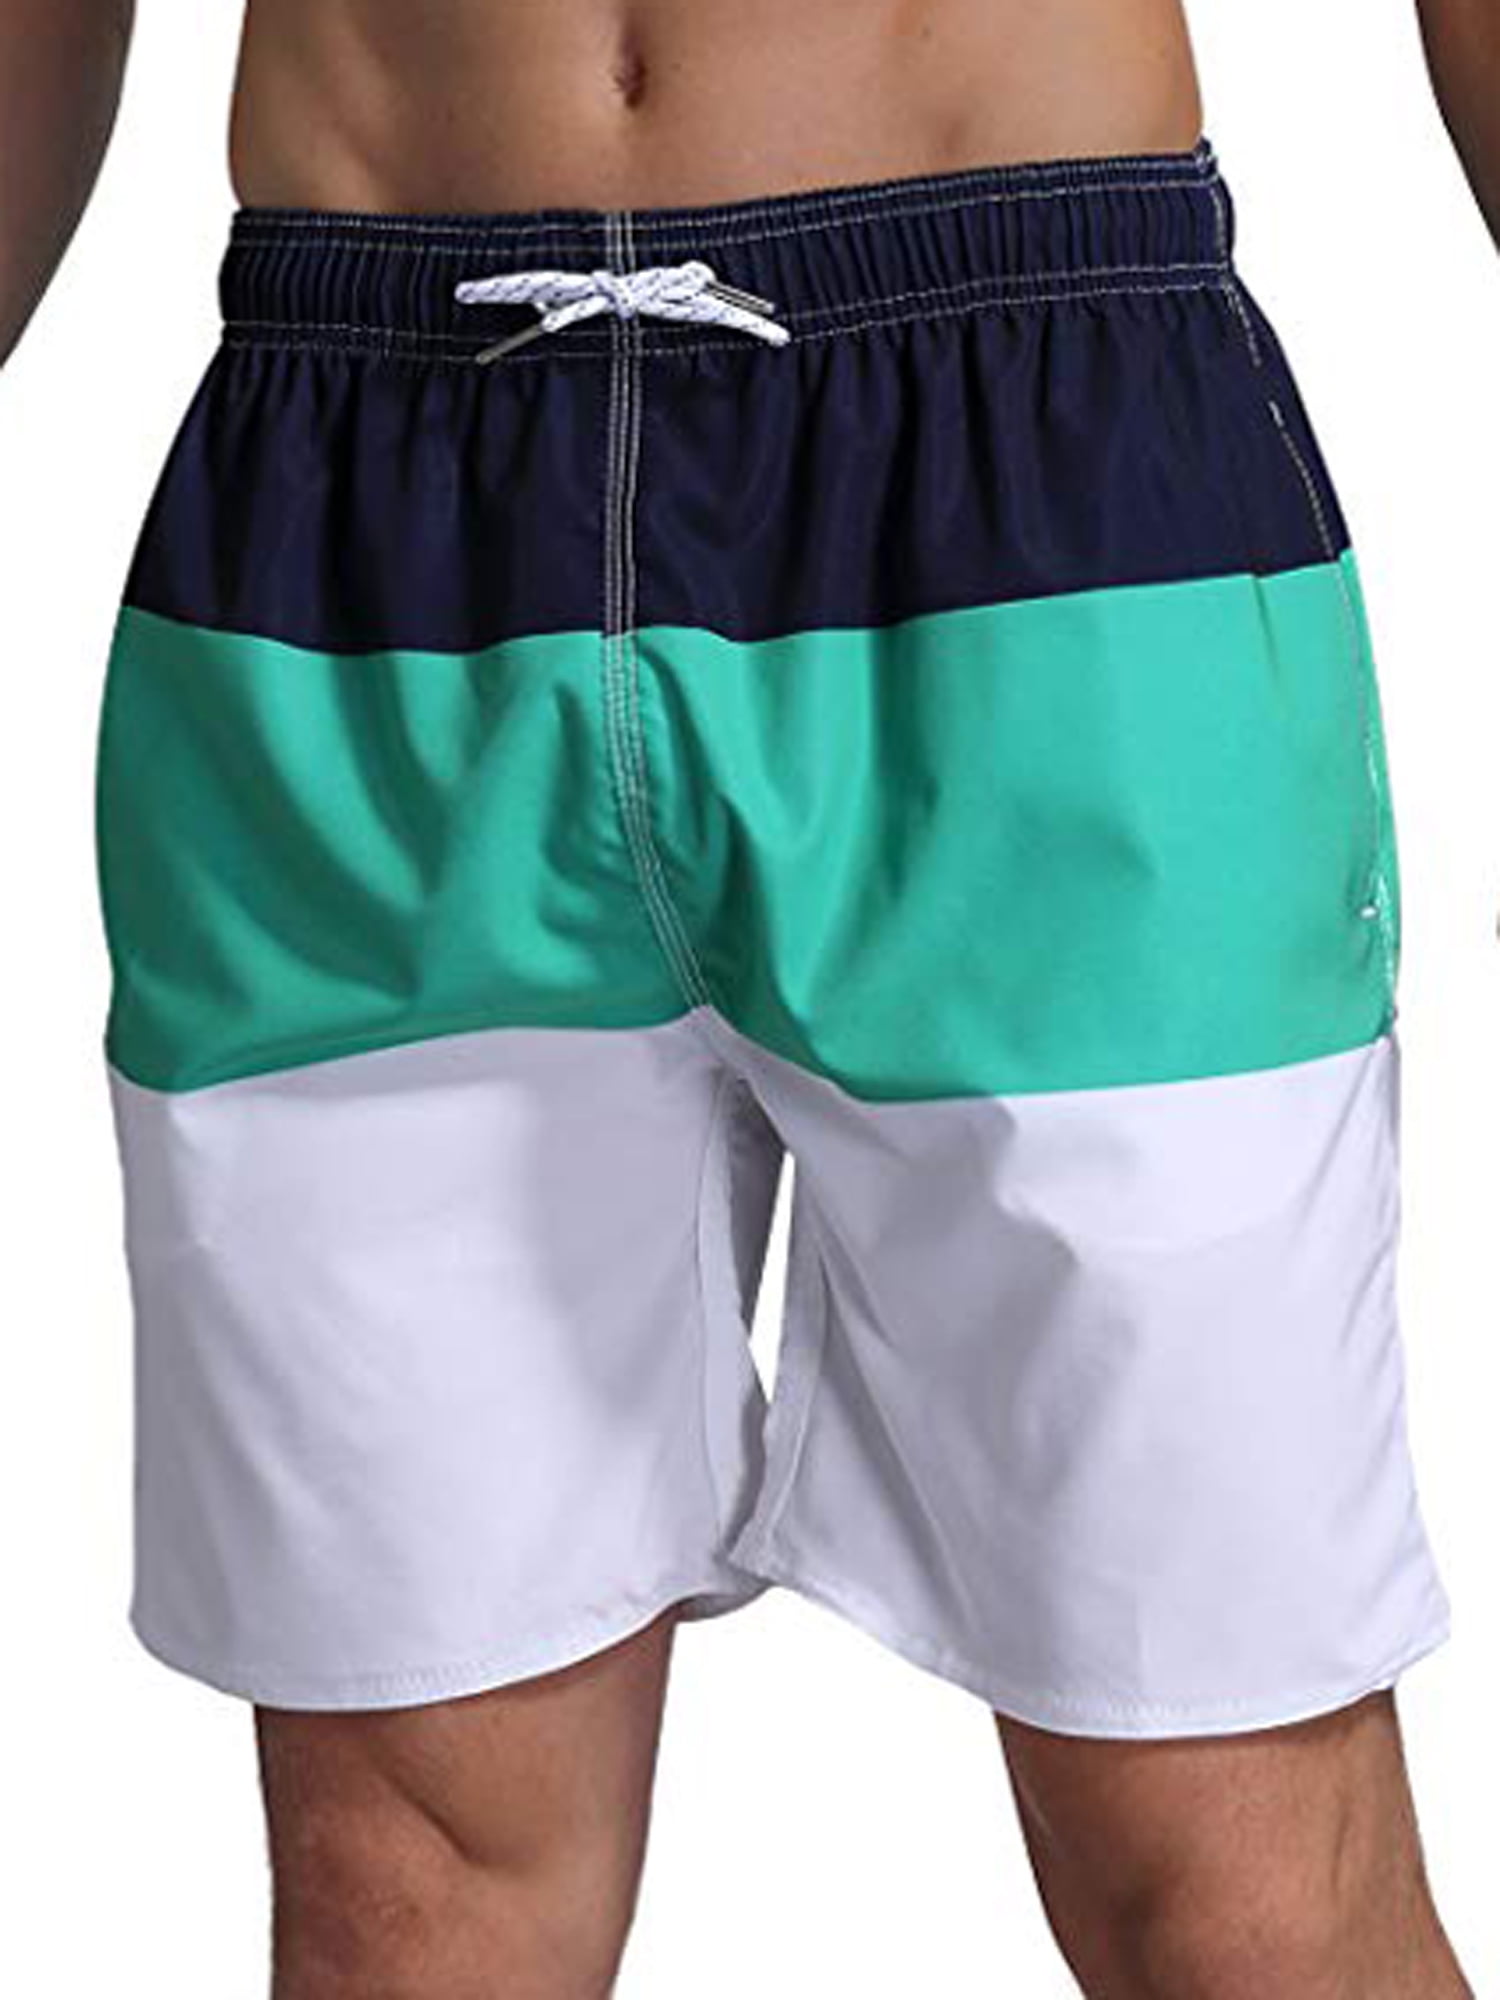 iBerryNY Mens Swim Trunks Adult Male Board Shorts Quick Dry, Cargo Pocket,  Blue, Large 